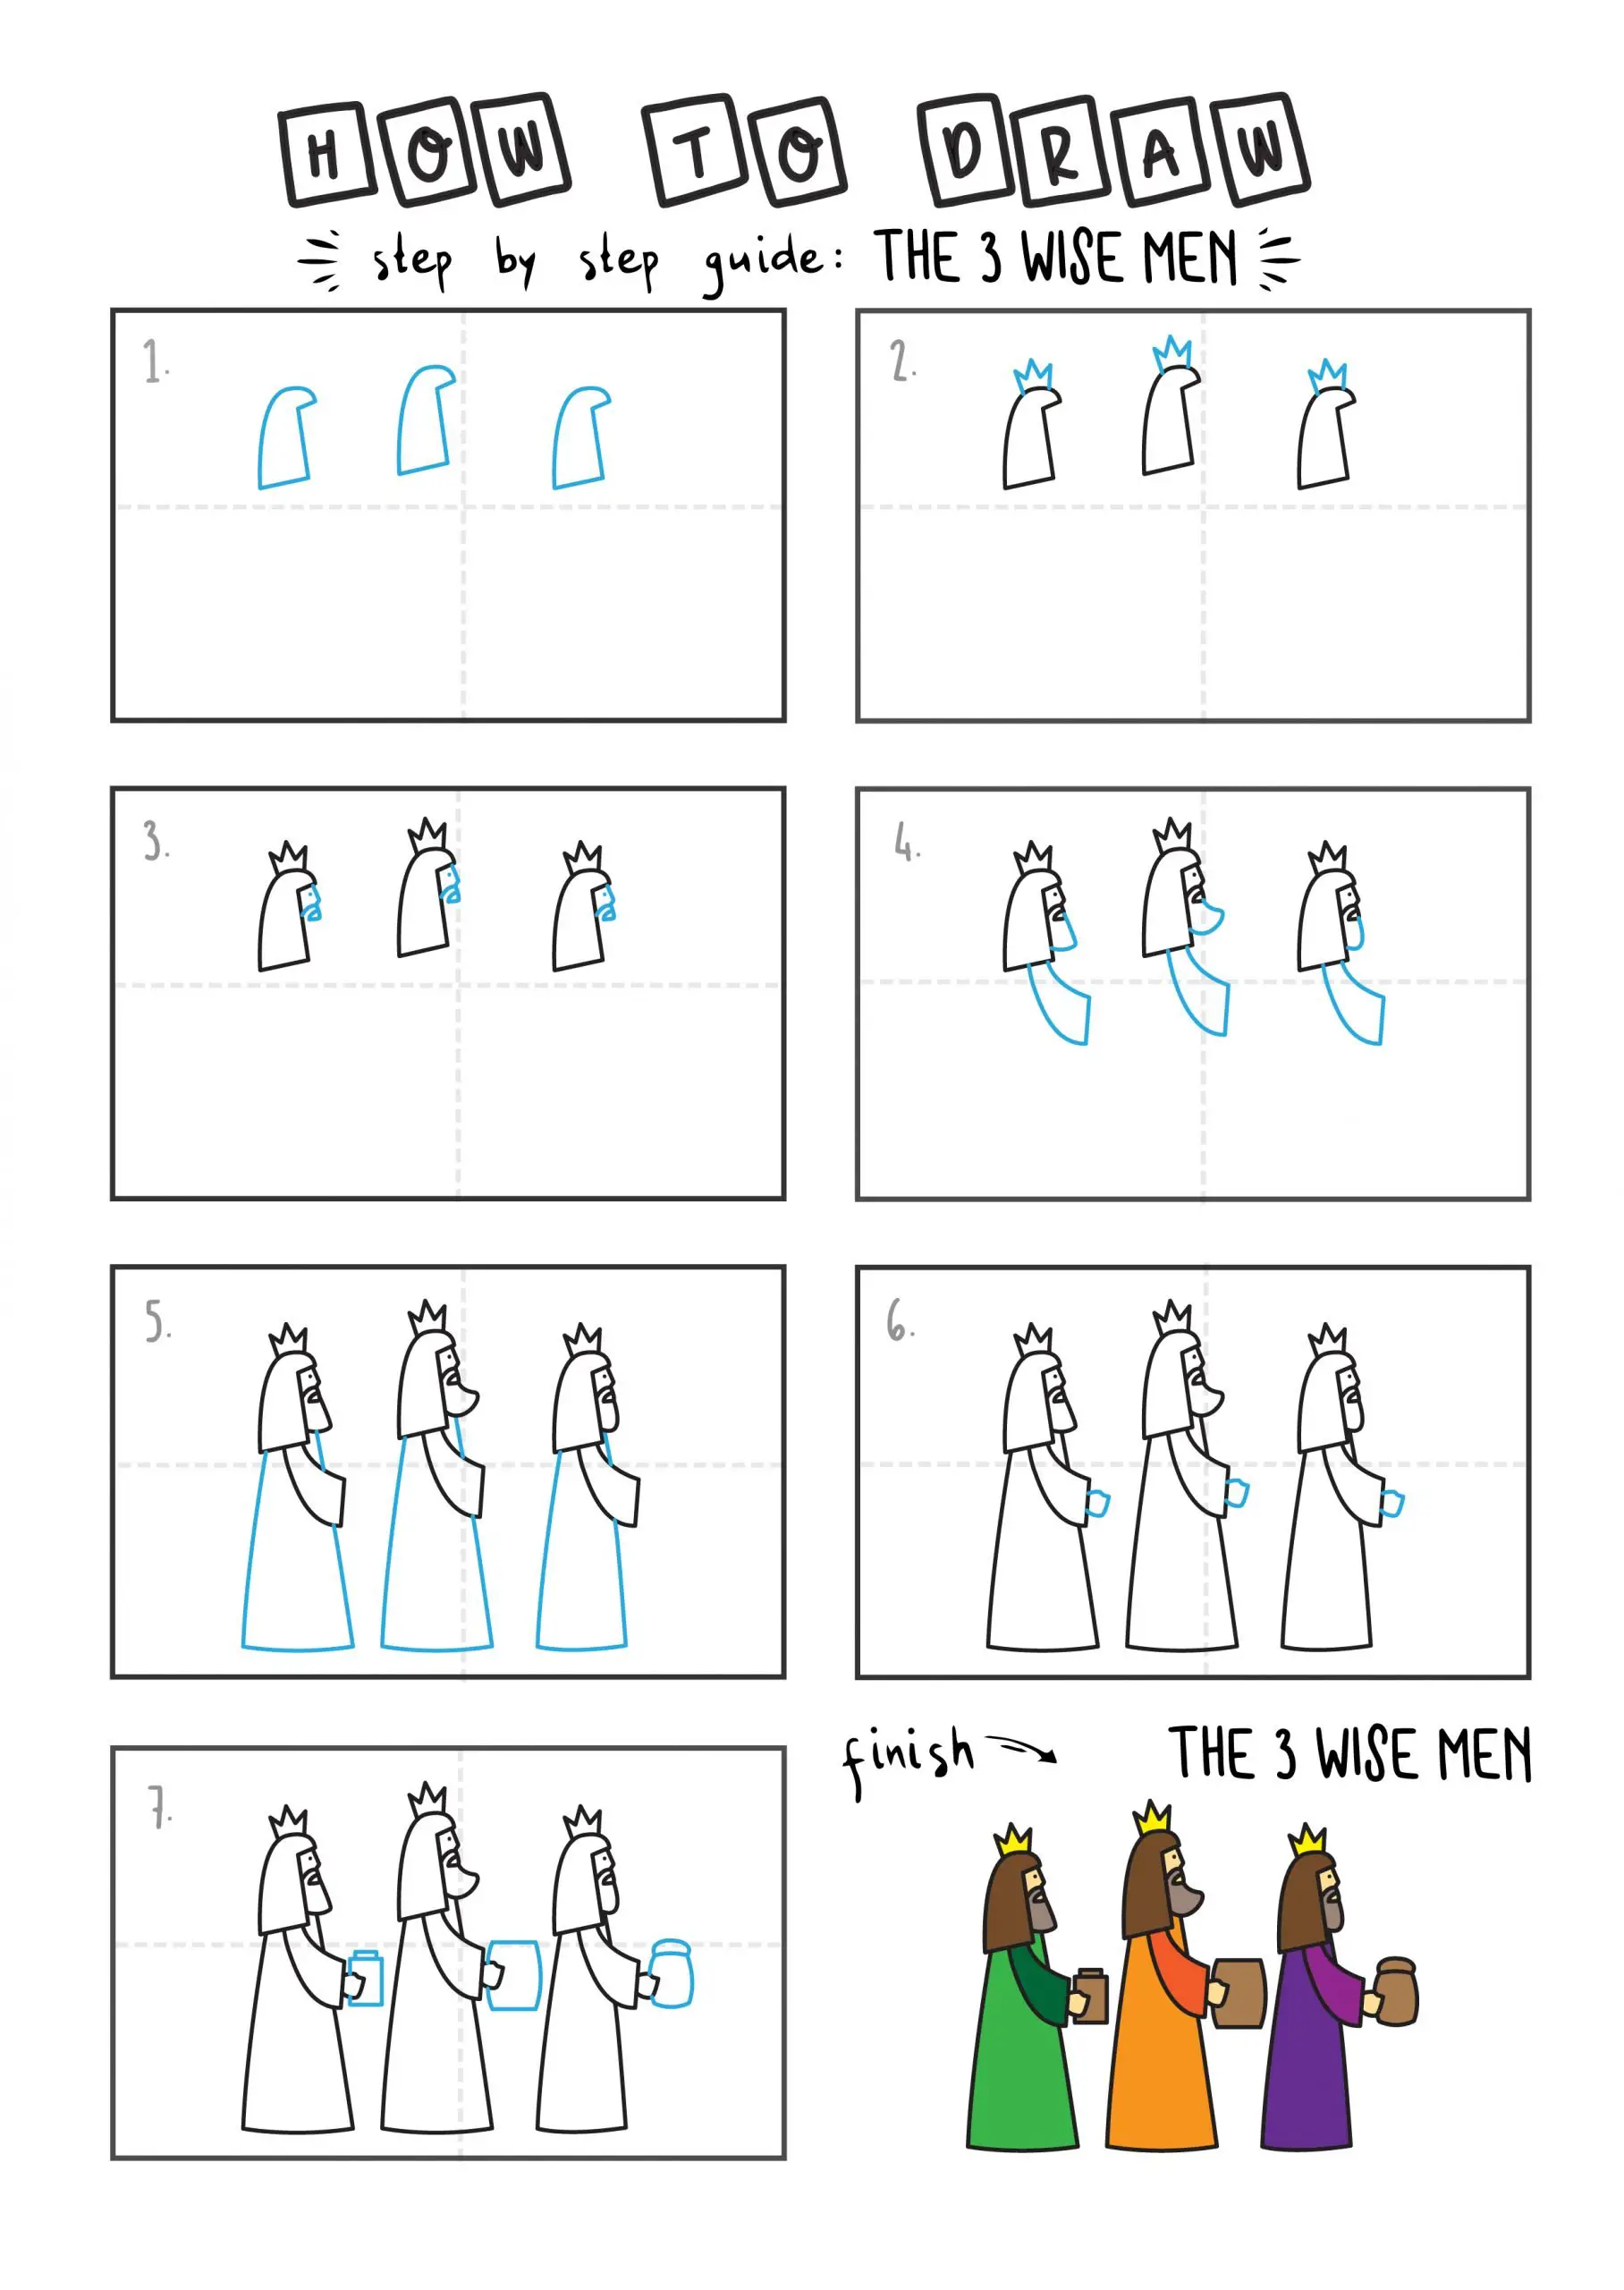 How To Draw 3 WISE MEN CHRISTIAN BIBLE By Step For Kids Easy Illustration Doodle Drawing GUIDE 2